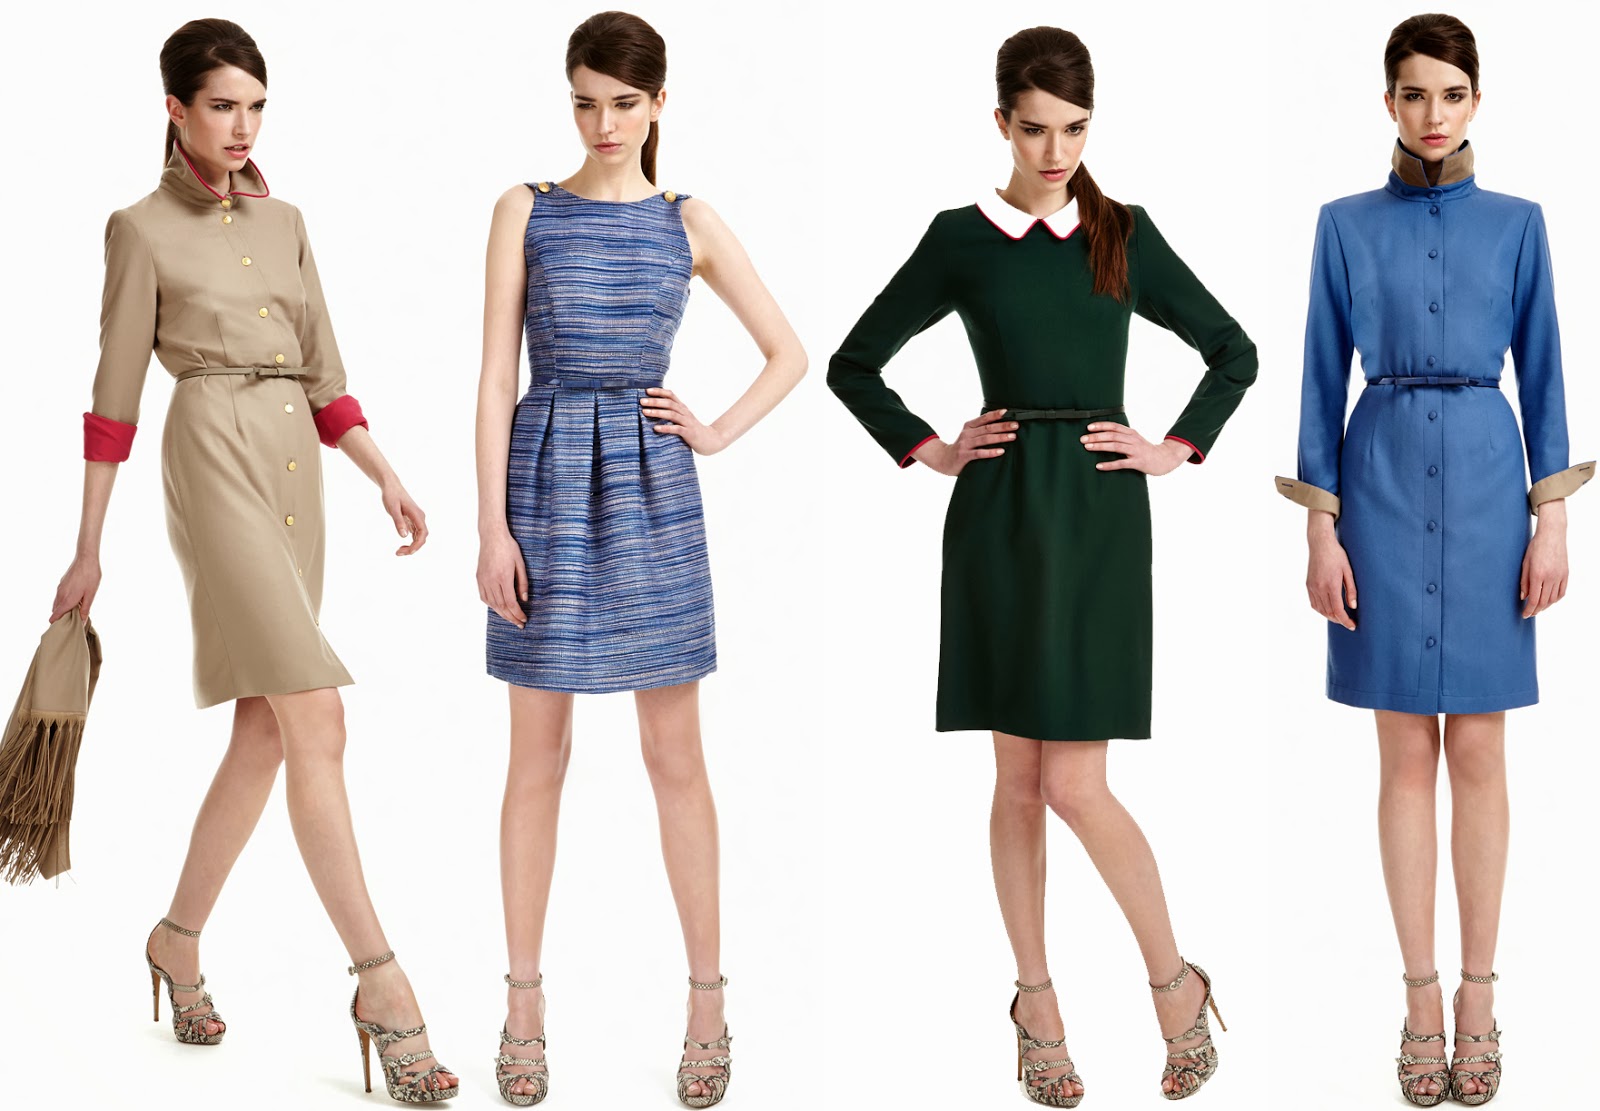 Silk and Spice: How To: Dress Casual Chic For Work {Part 1} - Dresses